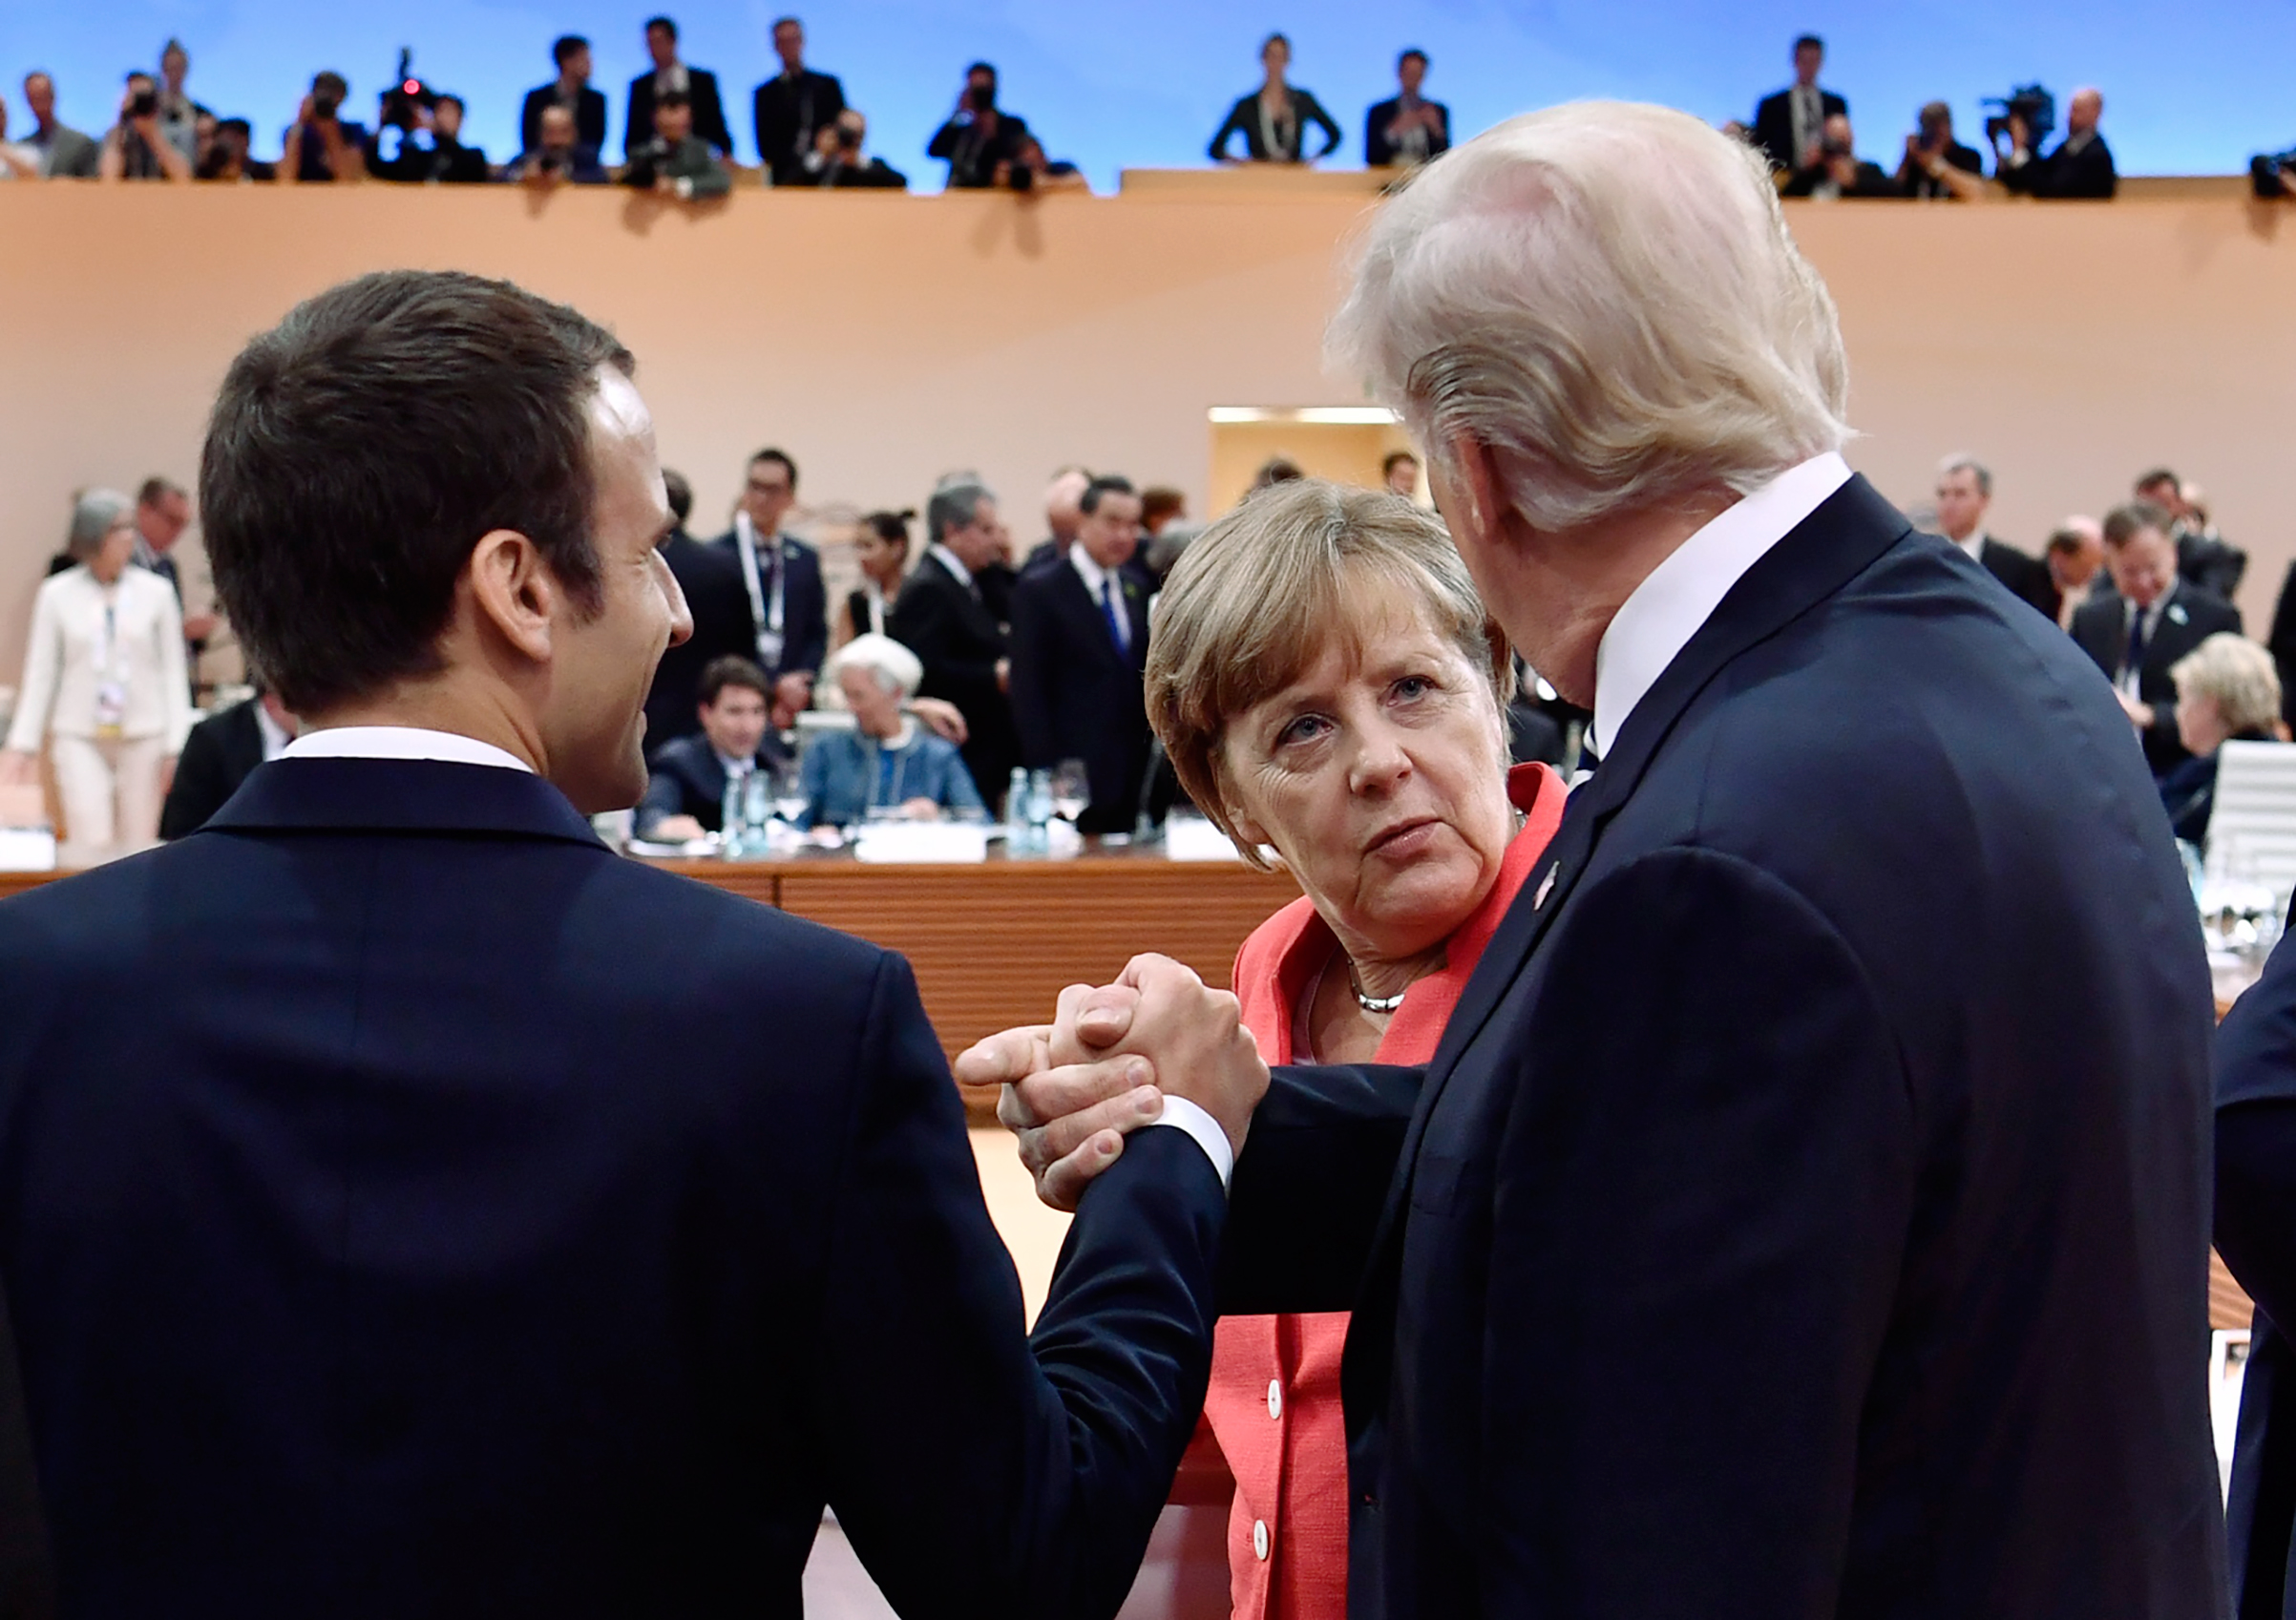 Macron, left, and Trump, right, chat with Merkel in Hamburg on July 7 (John MacDougall—AFP/Getty Images)